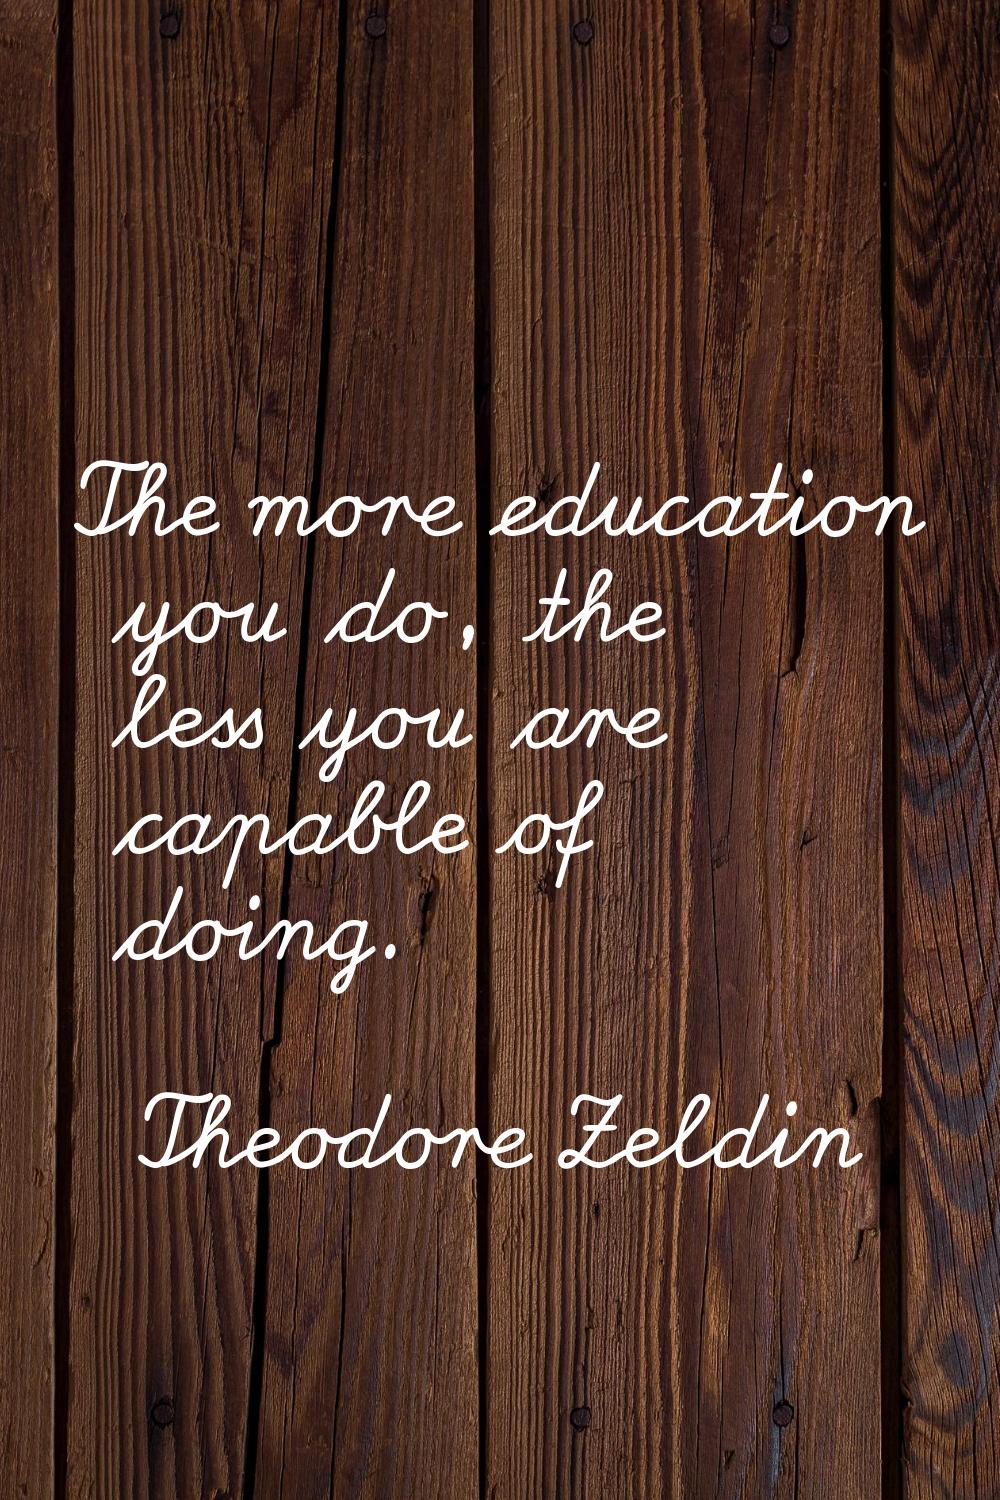 The more education you do, the less you are capable of doing.